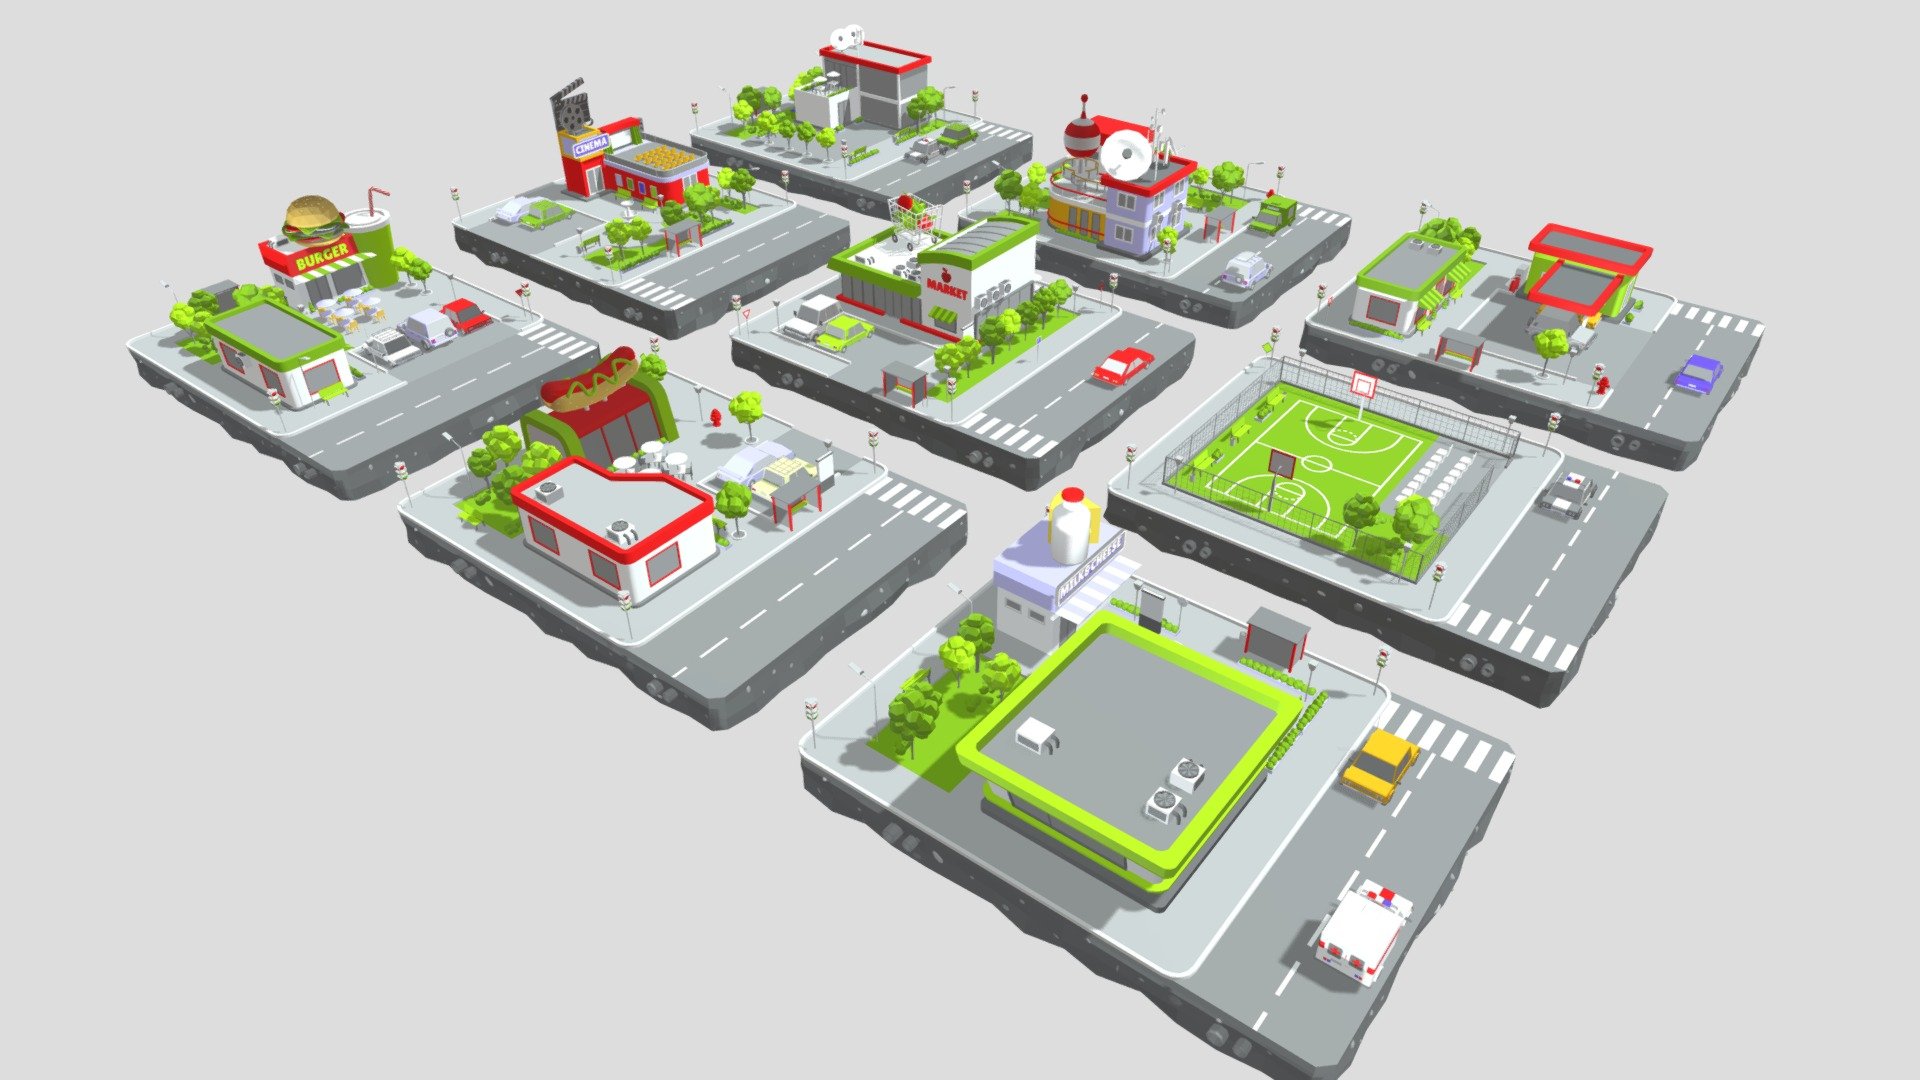 9 separate blocks with underground from &lsquo;Cartoon Low Poly City' pack in my collection.

The models has good level of detail within the minimalist animation style. Correct and simple mesh, all models are made in rectangles and triangles. Despite the high detailing, the models are not heavy and will open even on a weak computer. No additional plugins are used. Easily can be used in animation and games. Rendered in default 3ds Max Scanline Render, preview images rendered with exact light setup in 3ds Max scene.

Consists of 9 Blocks:
1. The Burger Block
2. The Stadium Block
3. The Hot dog Block
4. The Police office Block
5. The Cinema Block
6. The Supermarket Block
7. The Science Center Block
8. The Dairy Store Block
9. The Gas station Block

There are also 7 types of cars in the city:
1. Police car
2. Truck
3. Sports car
4. Sedan
5. SUV
6. Delivery truck
7. Ambulance - Cartoon Low Poly City - 9 Blocks - Buy Royalty Free 3D model by Danyiar (@daniyar_ab) 3d model